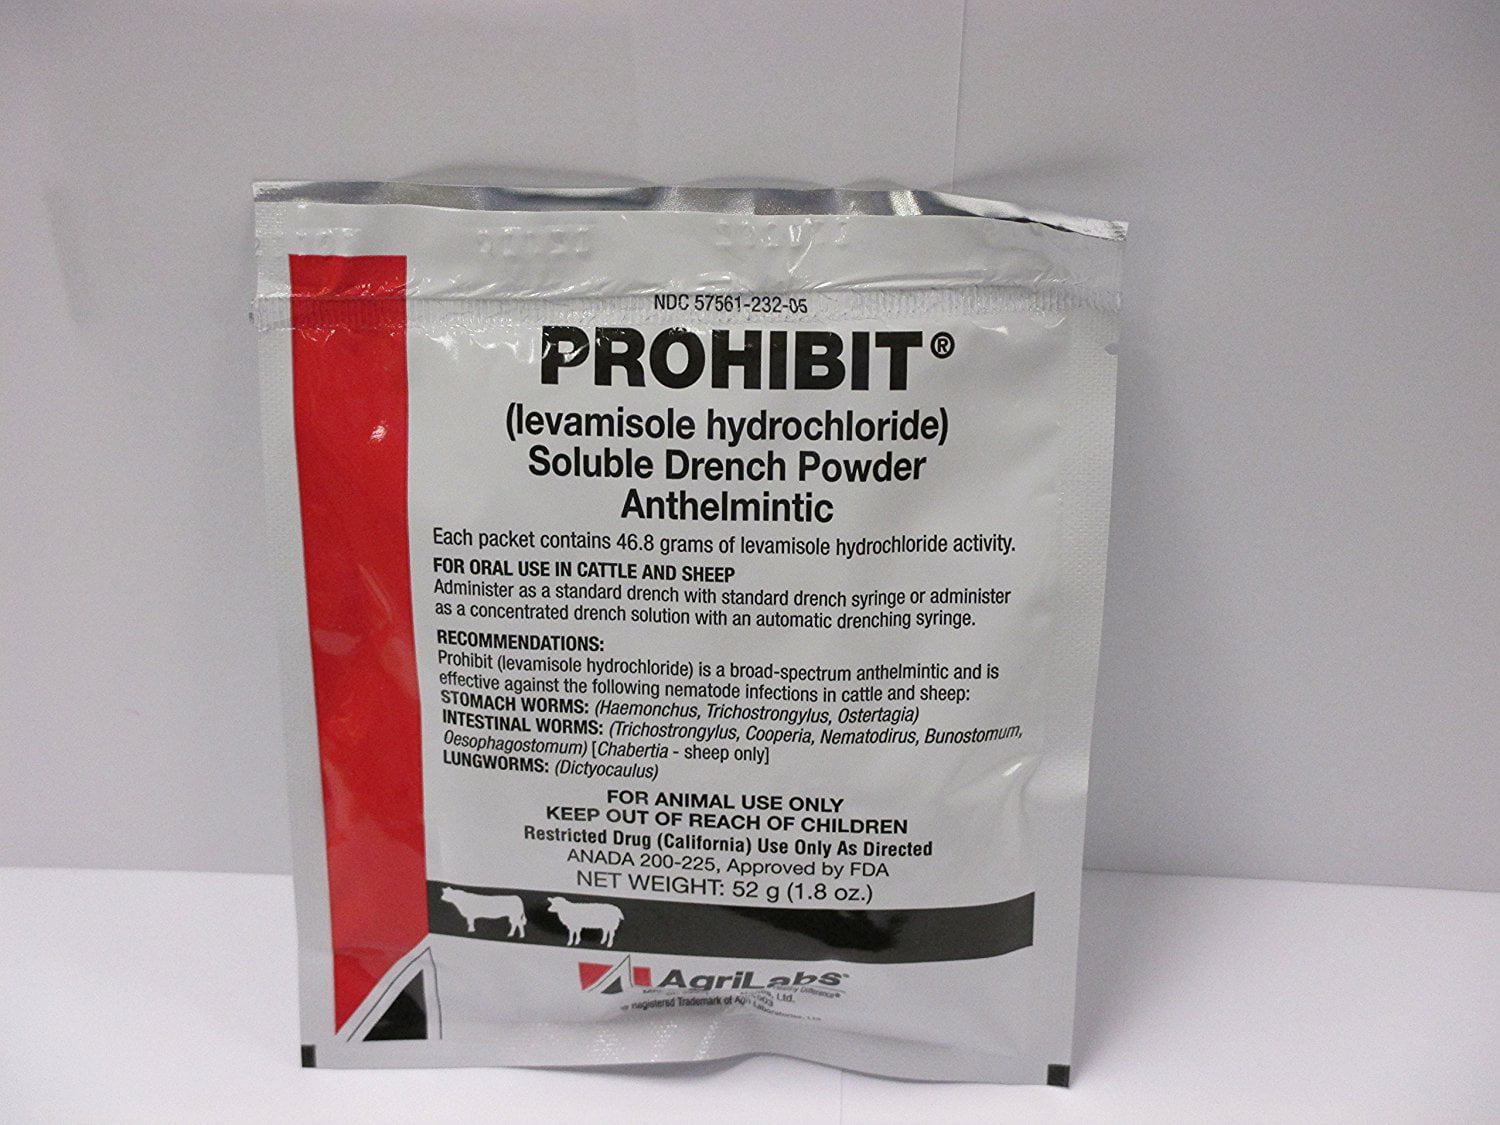 Agrilabs Prohibit Soluble Drench Powder 52G Cattle Sheep Levamisole 